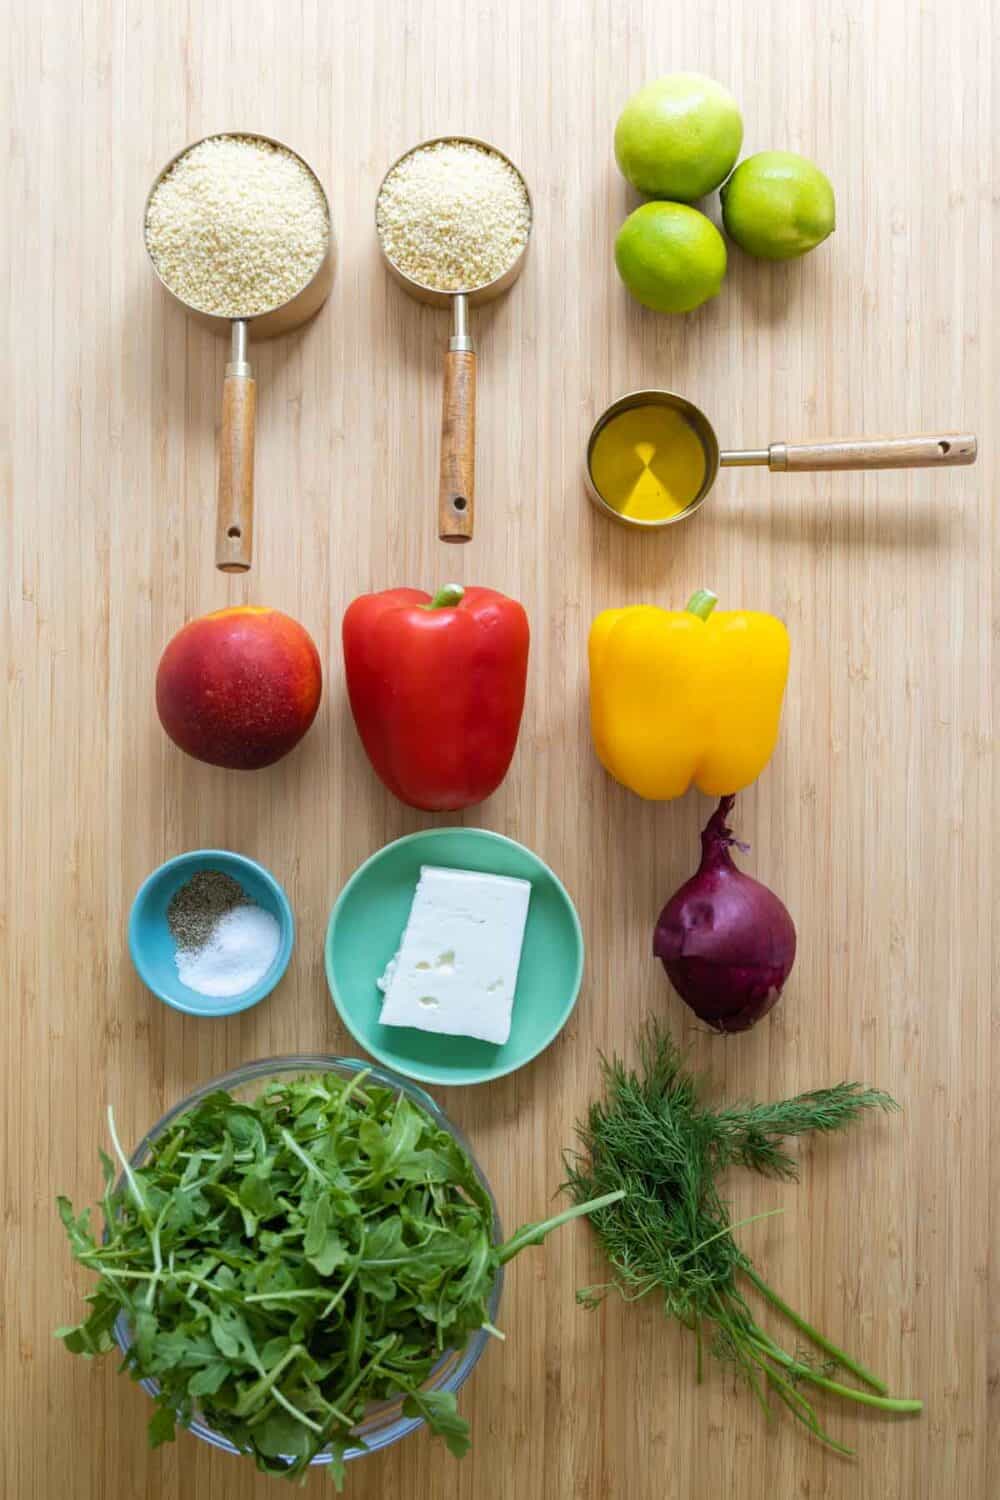 Ingredients for couscous salad laid out on a kitchen counter.